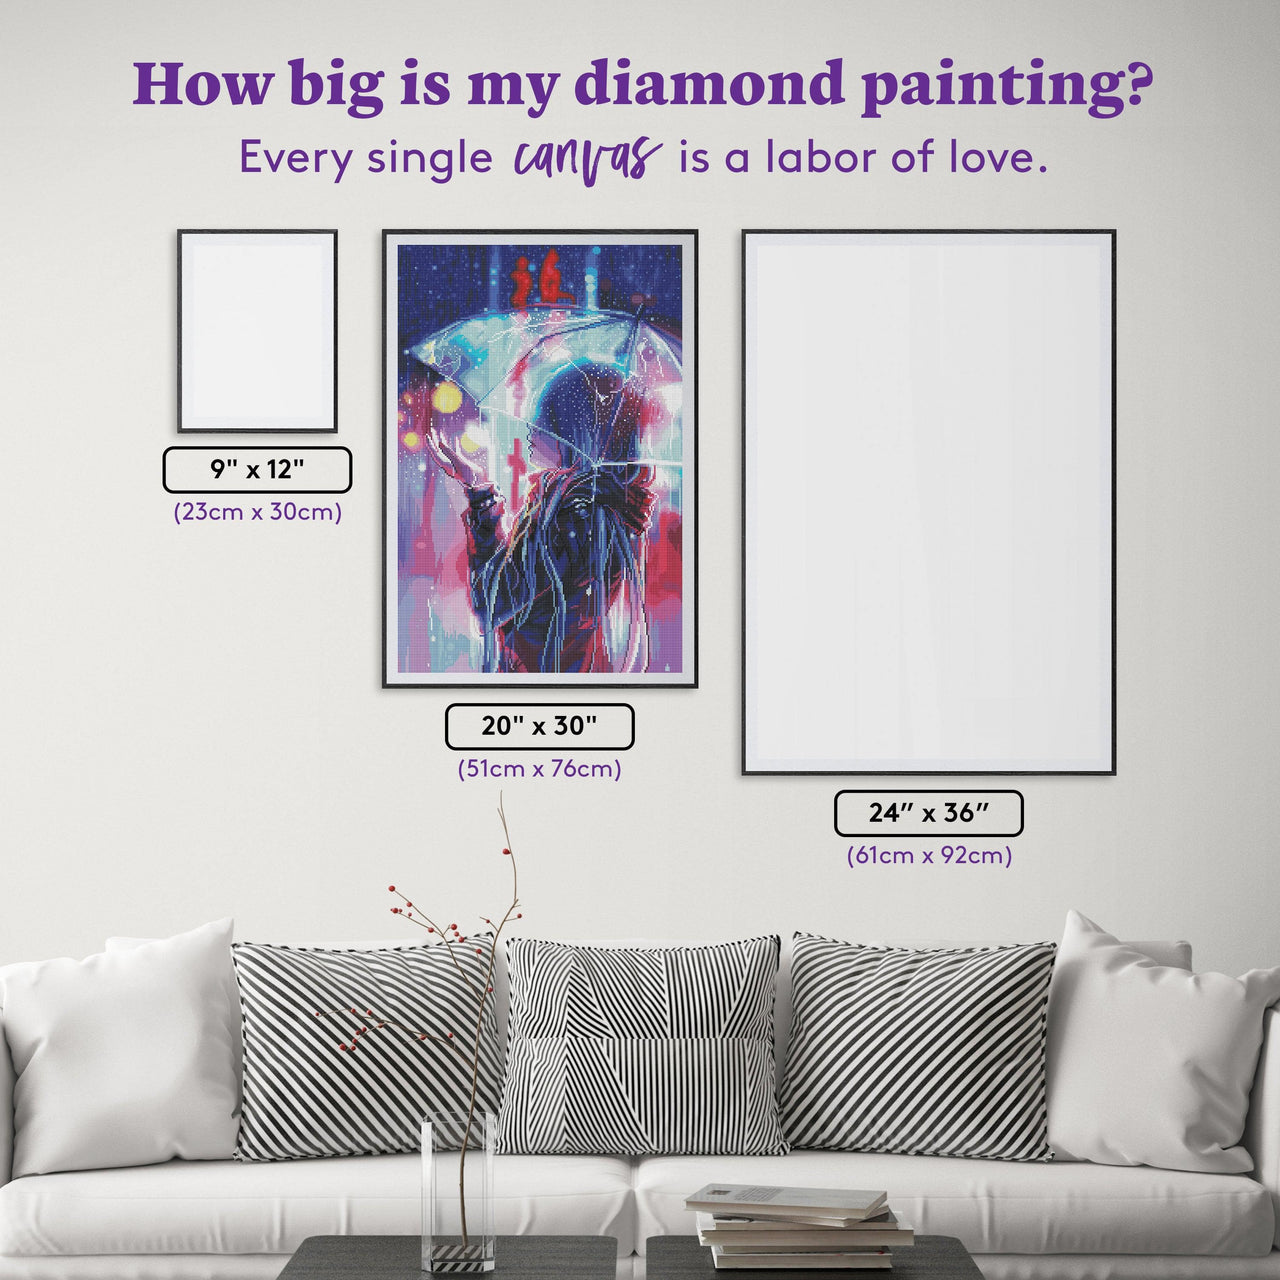 Diamond Painting Transparent 20" x 30″ (51cm x 76cm) / Round with 50 Colors including 3 ABs / 49,231